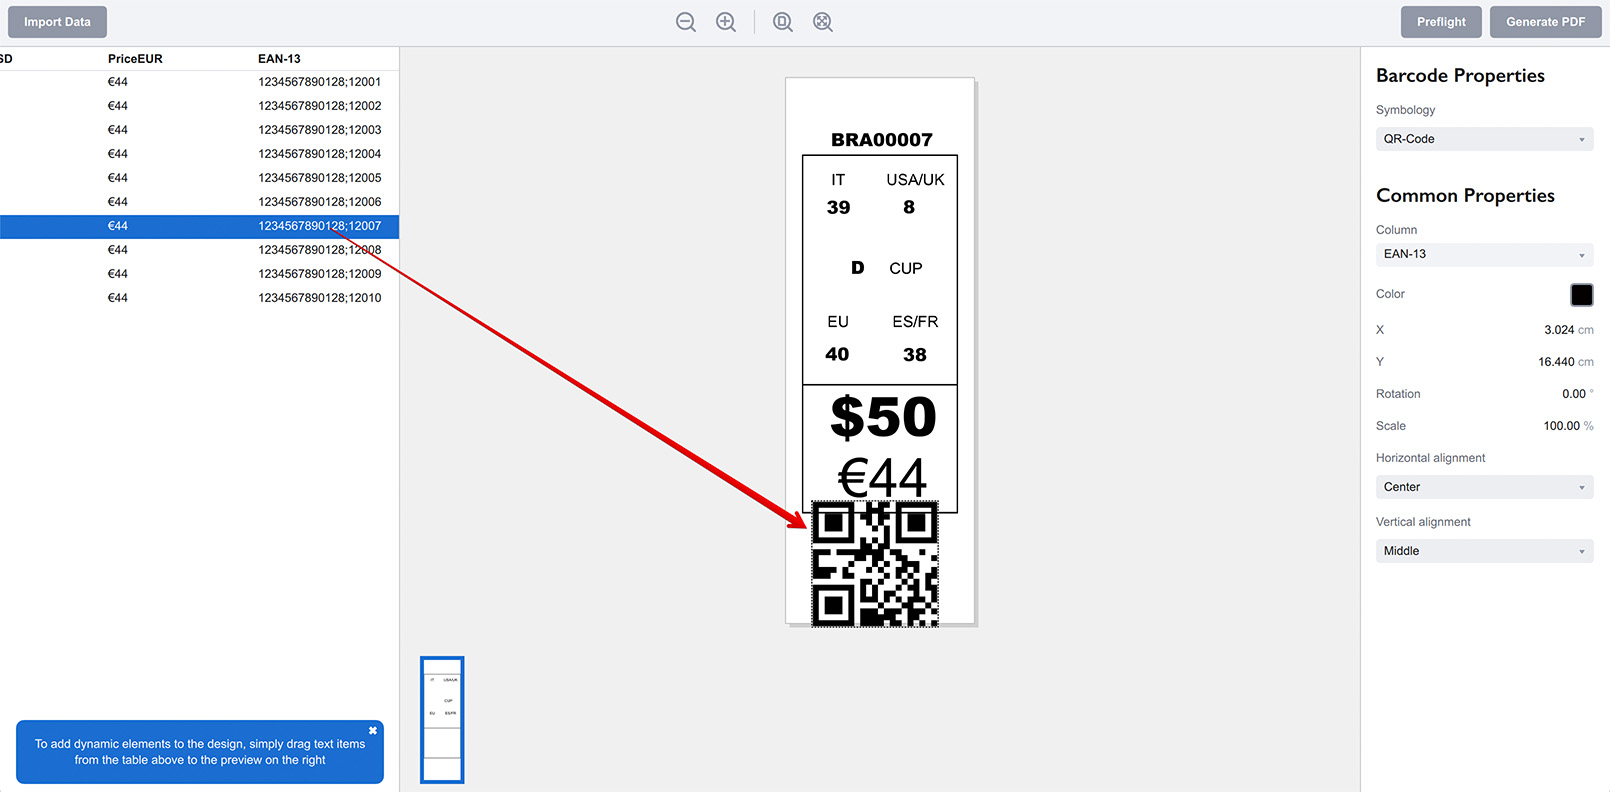 QR code is added to the price tag